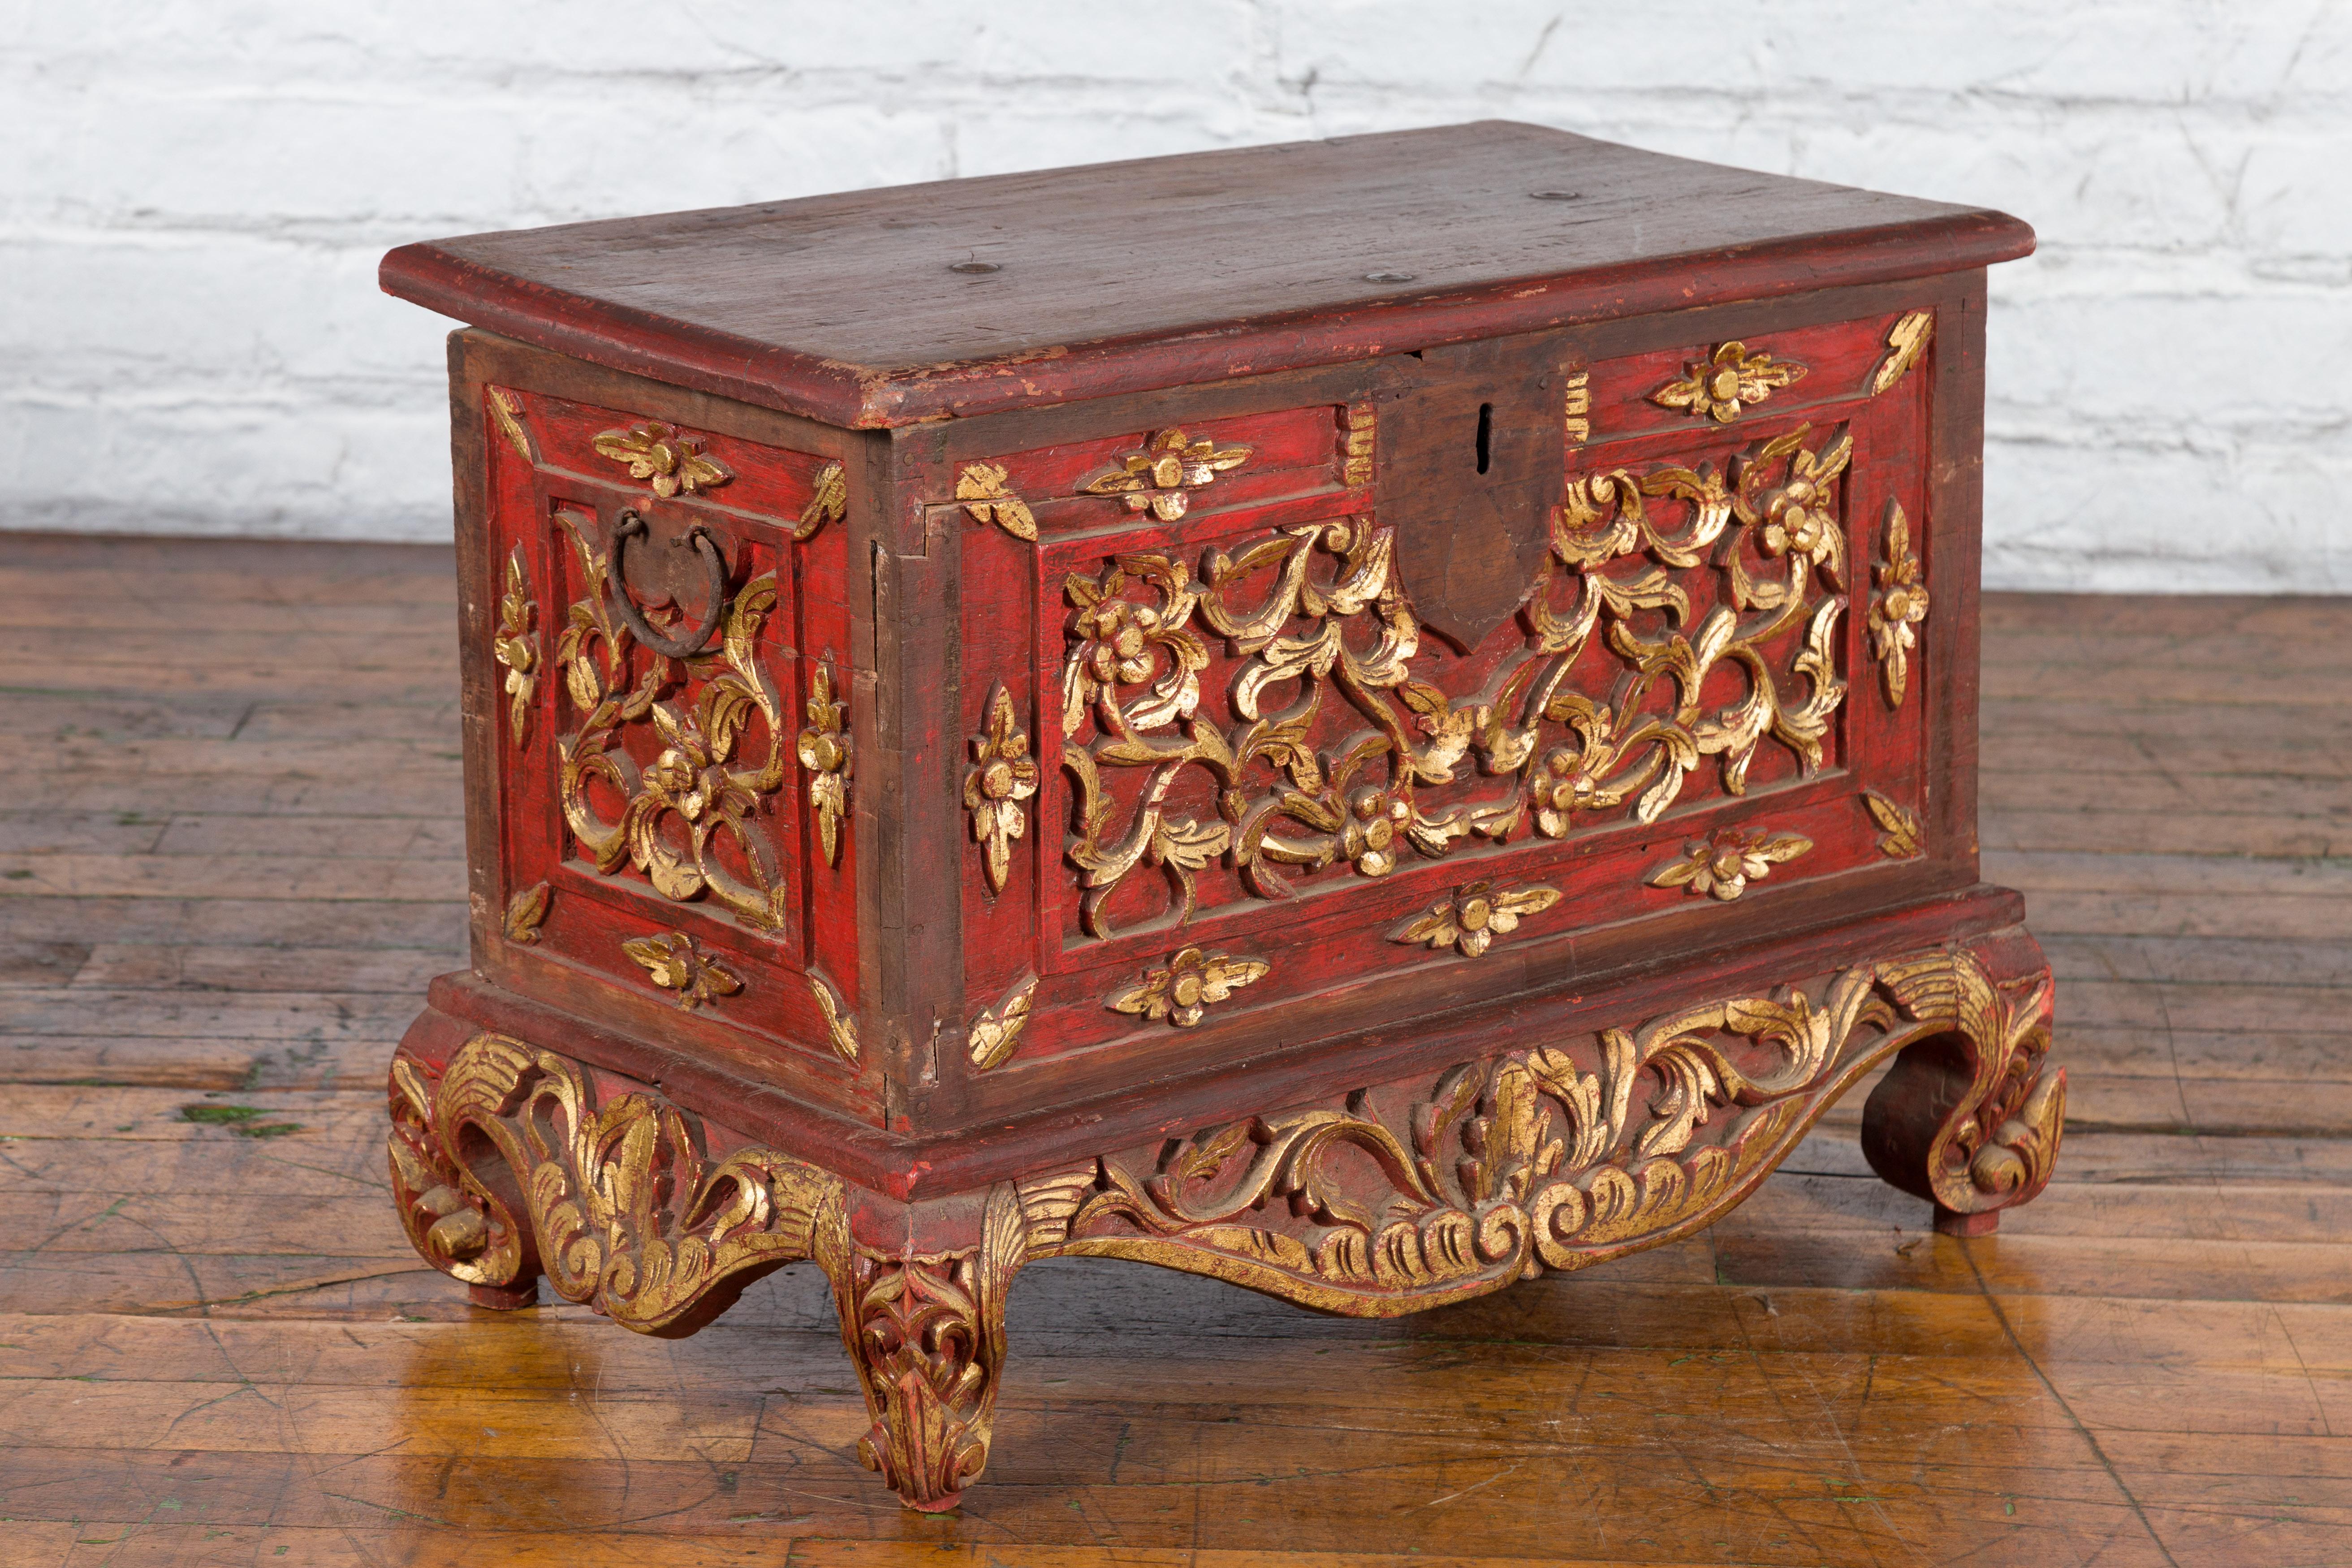 Antique Madura Hand Carved Wooden Treasure Chest with Red and Gold Décor For Sale 5